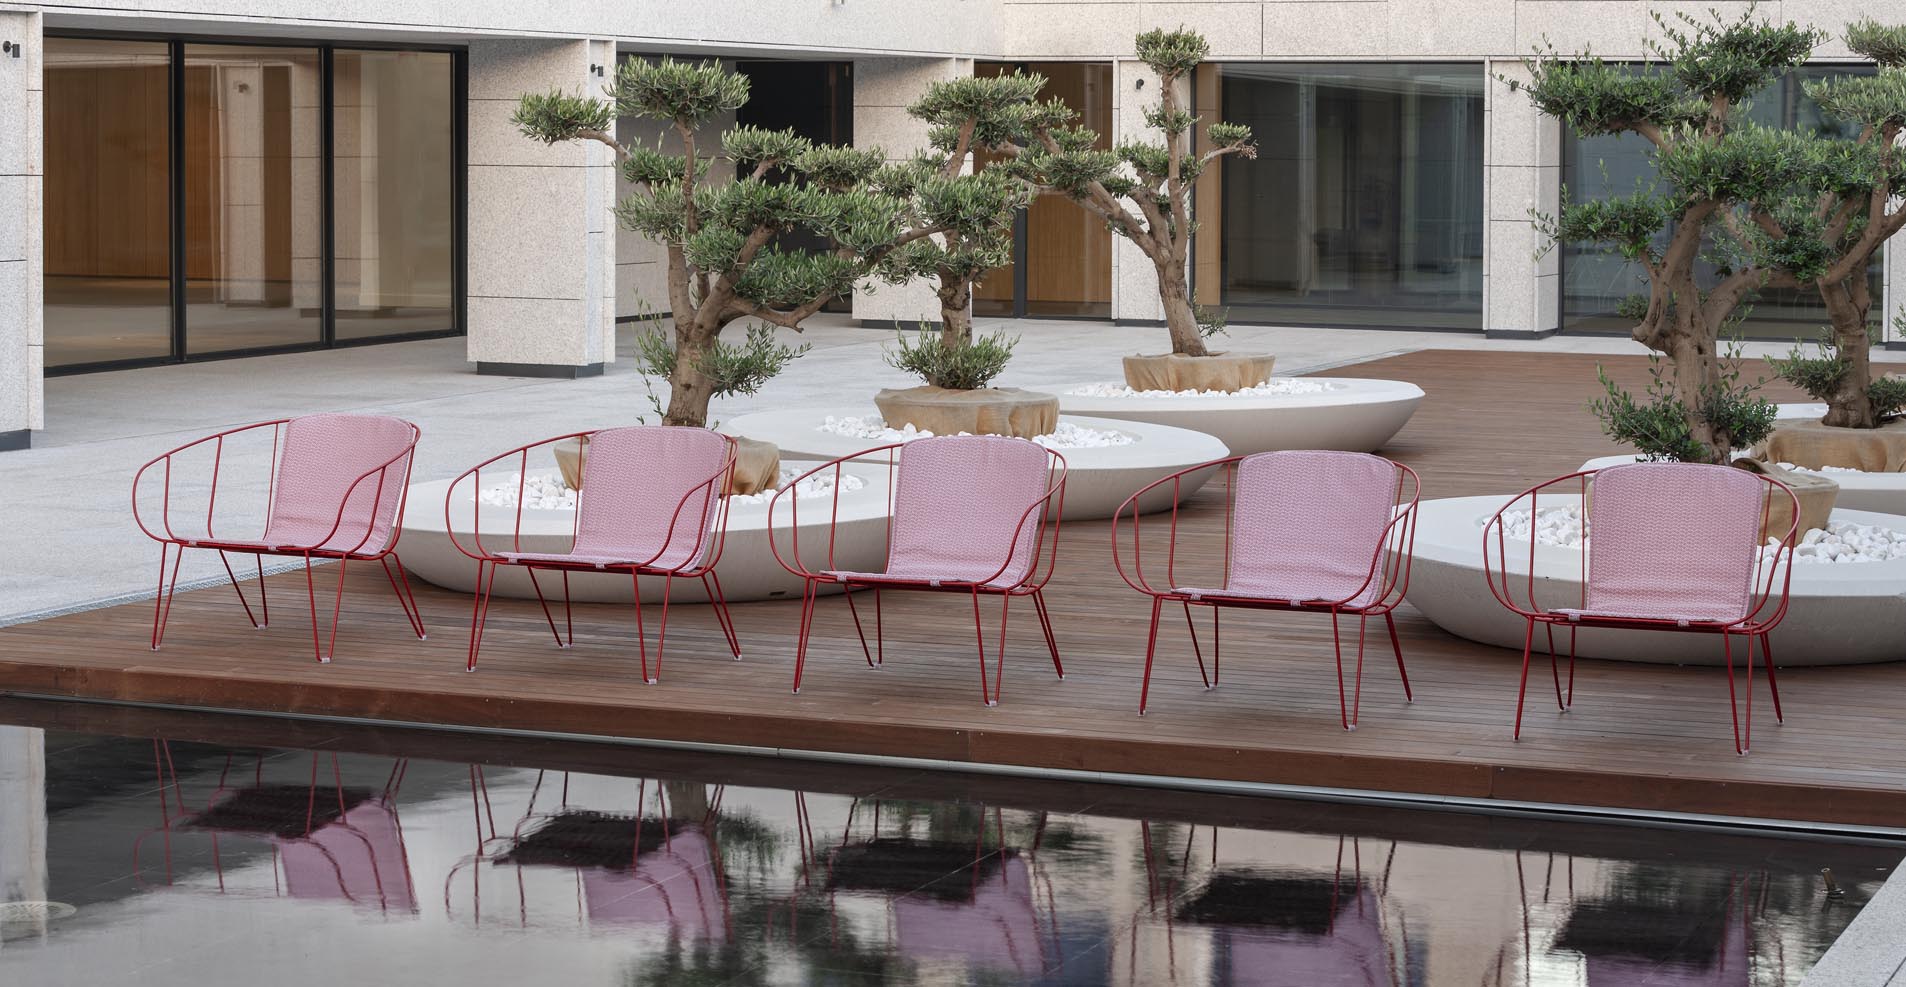 Olivo Lounge for Isimar is a stacking outdoor lounge chair